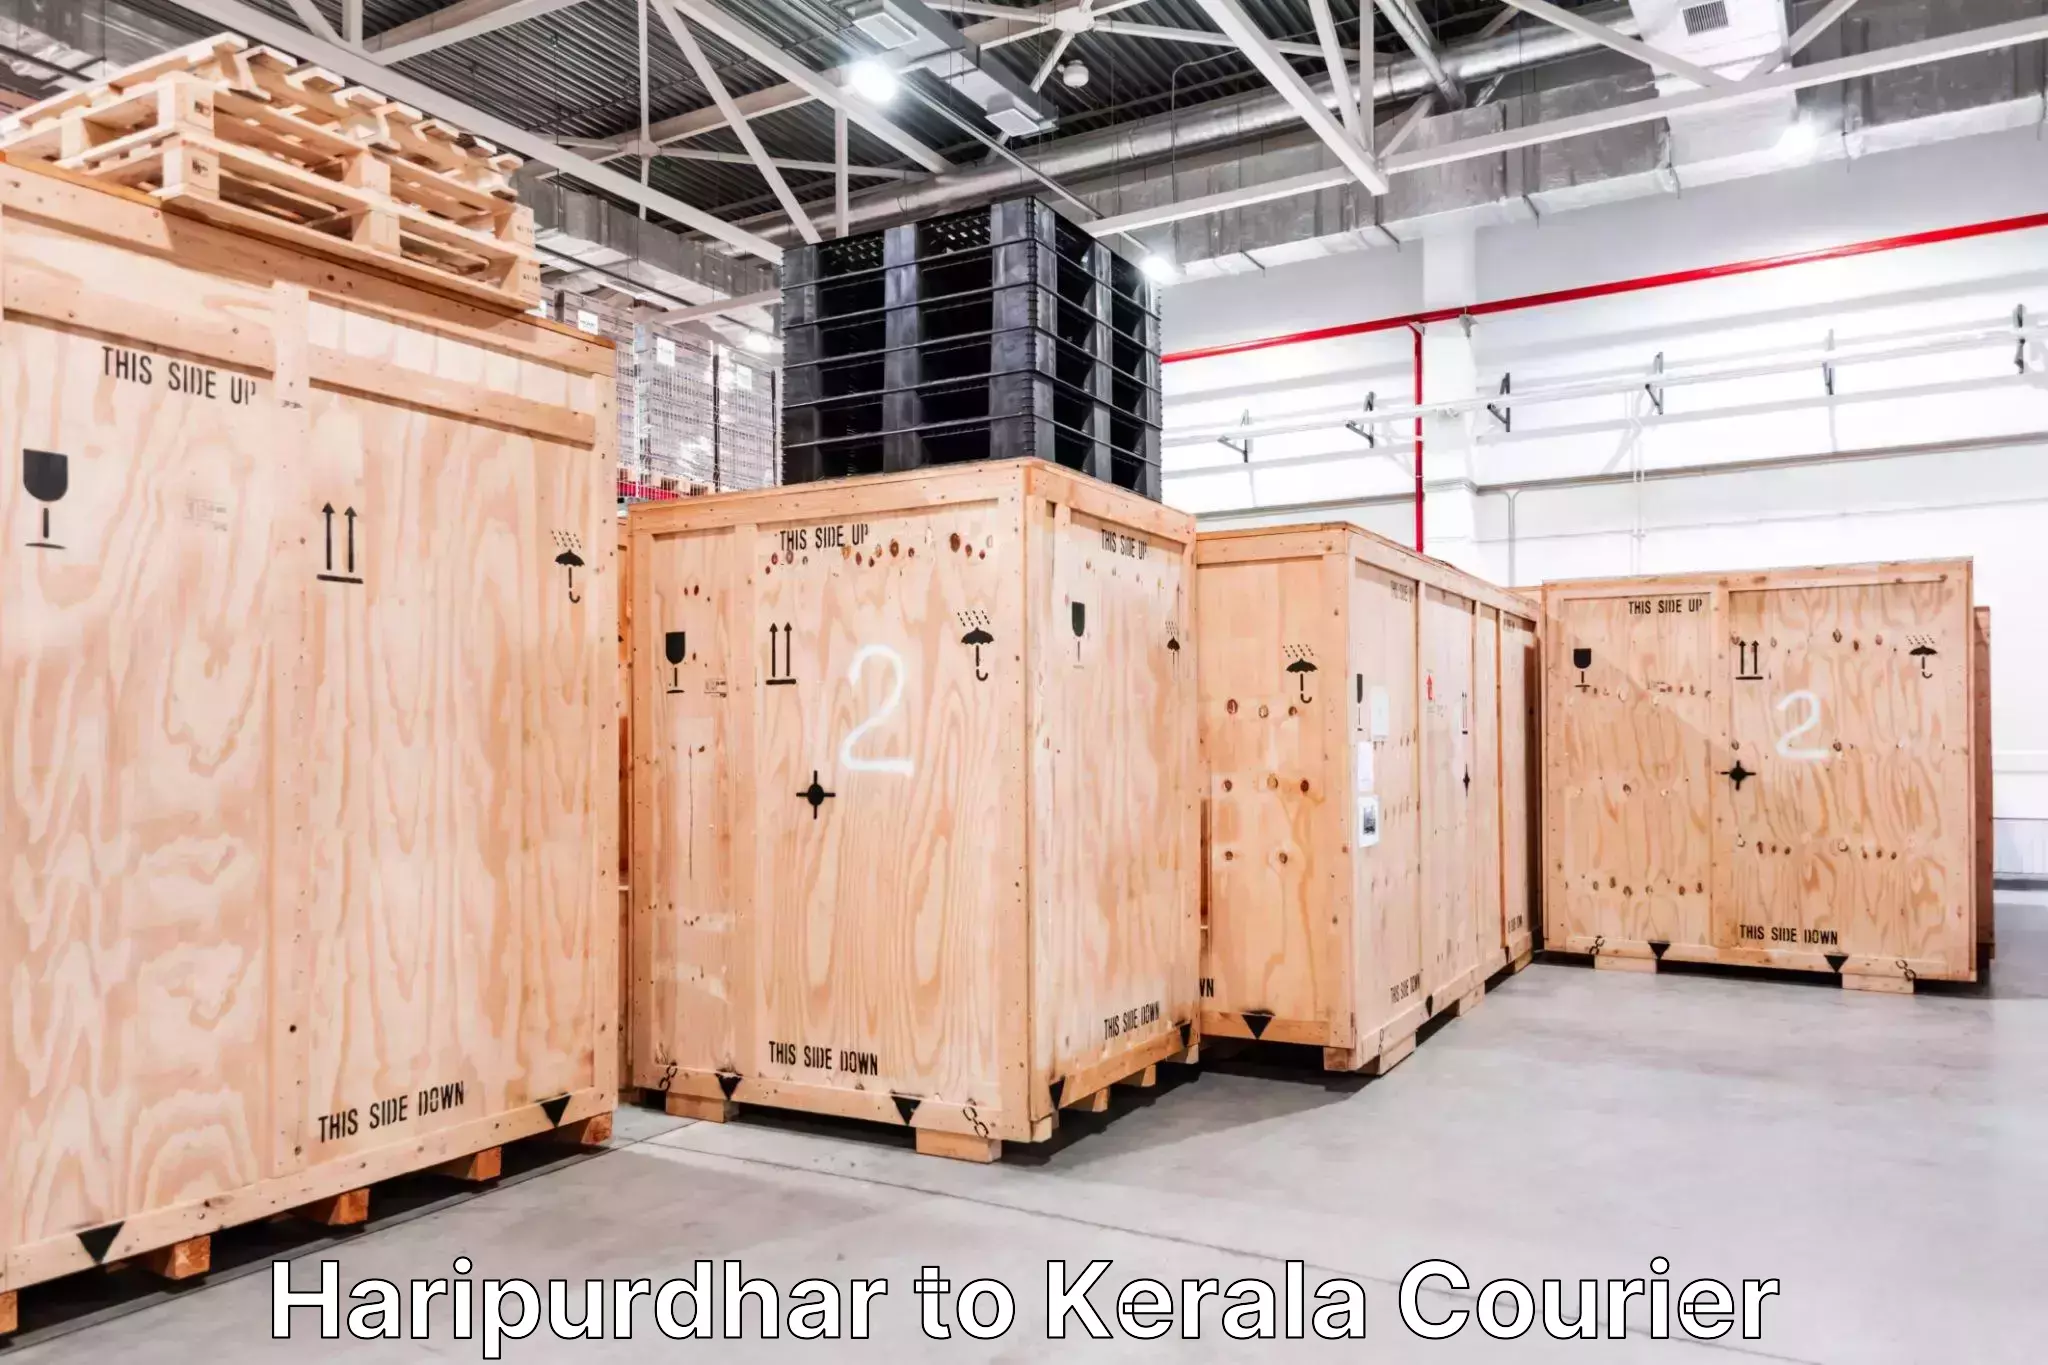 Holiday season luggage delivery Haripurdhar to Cochin University of Science and Technology